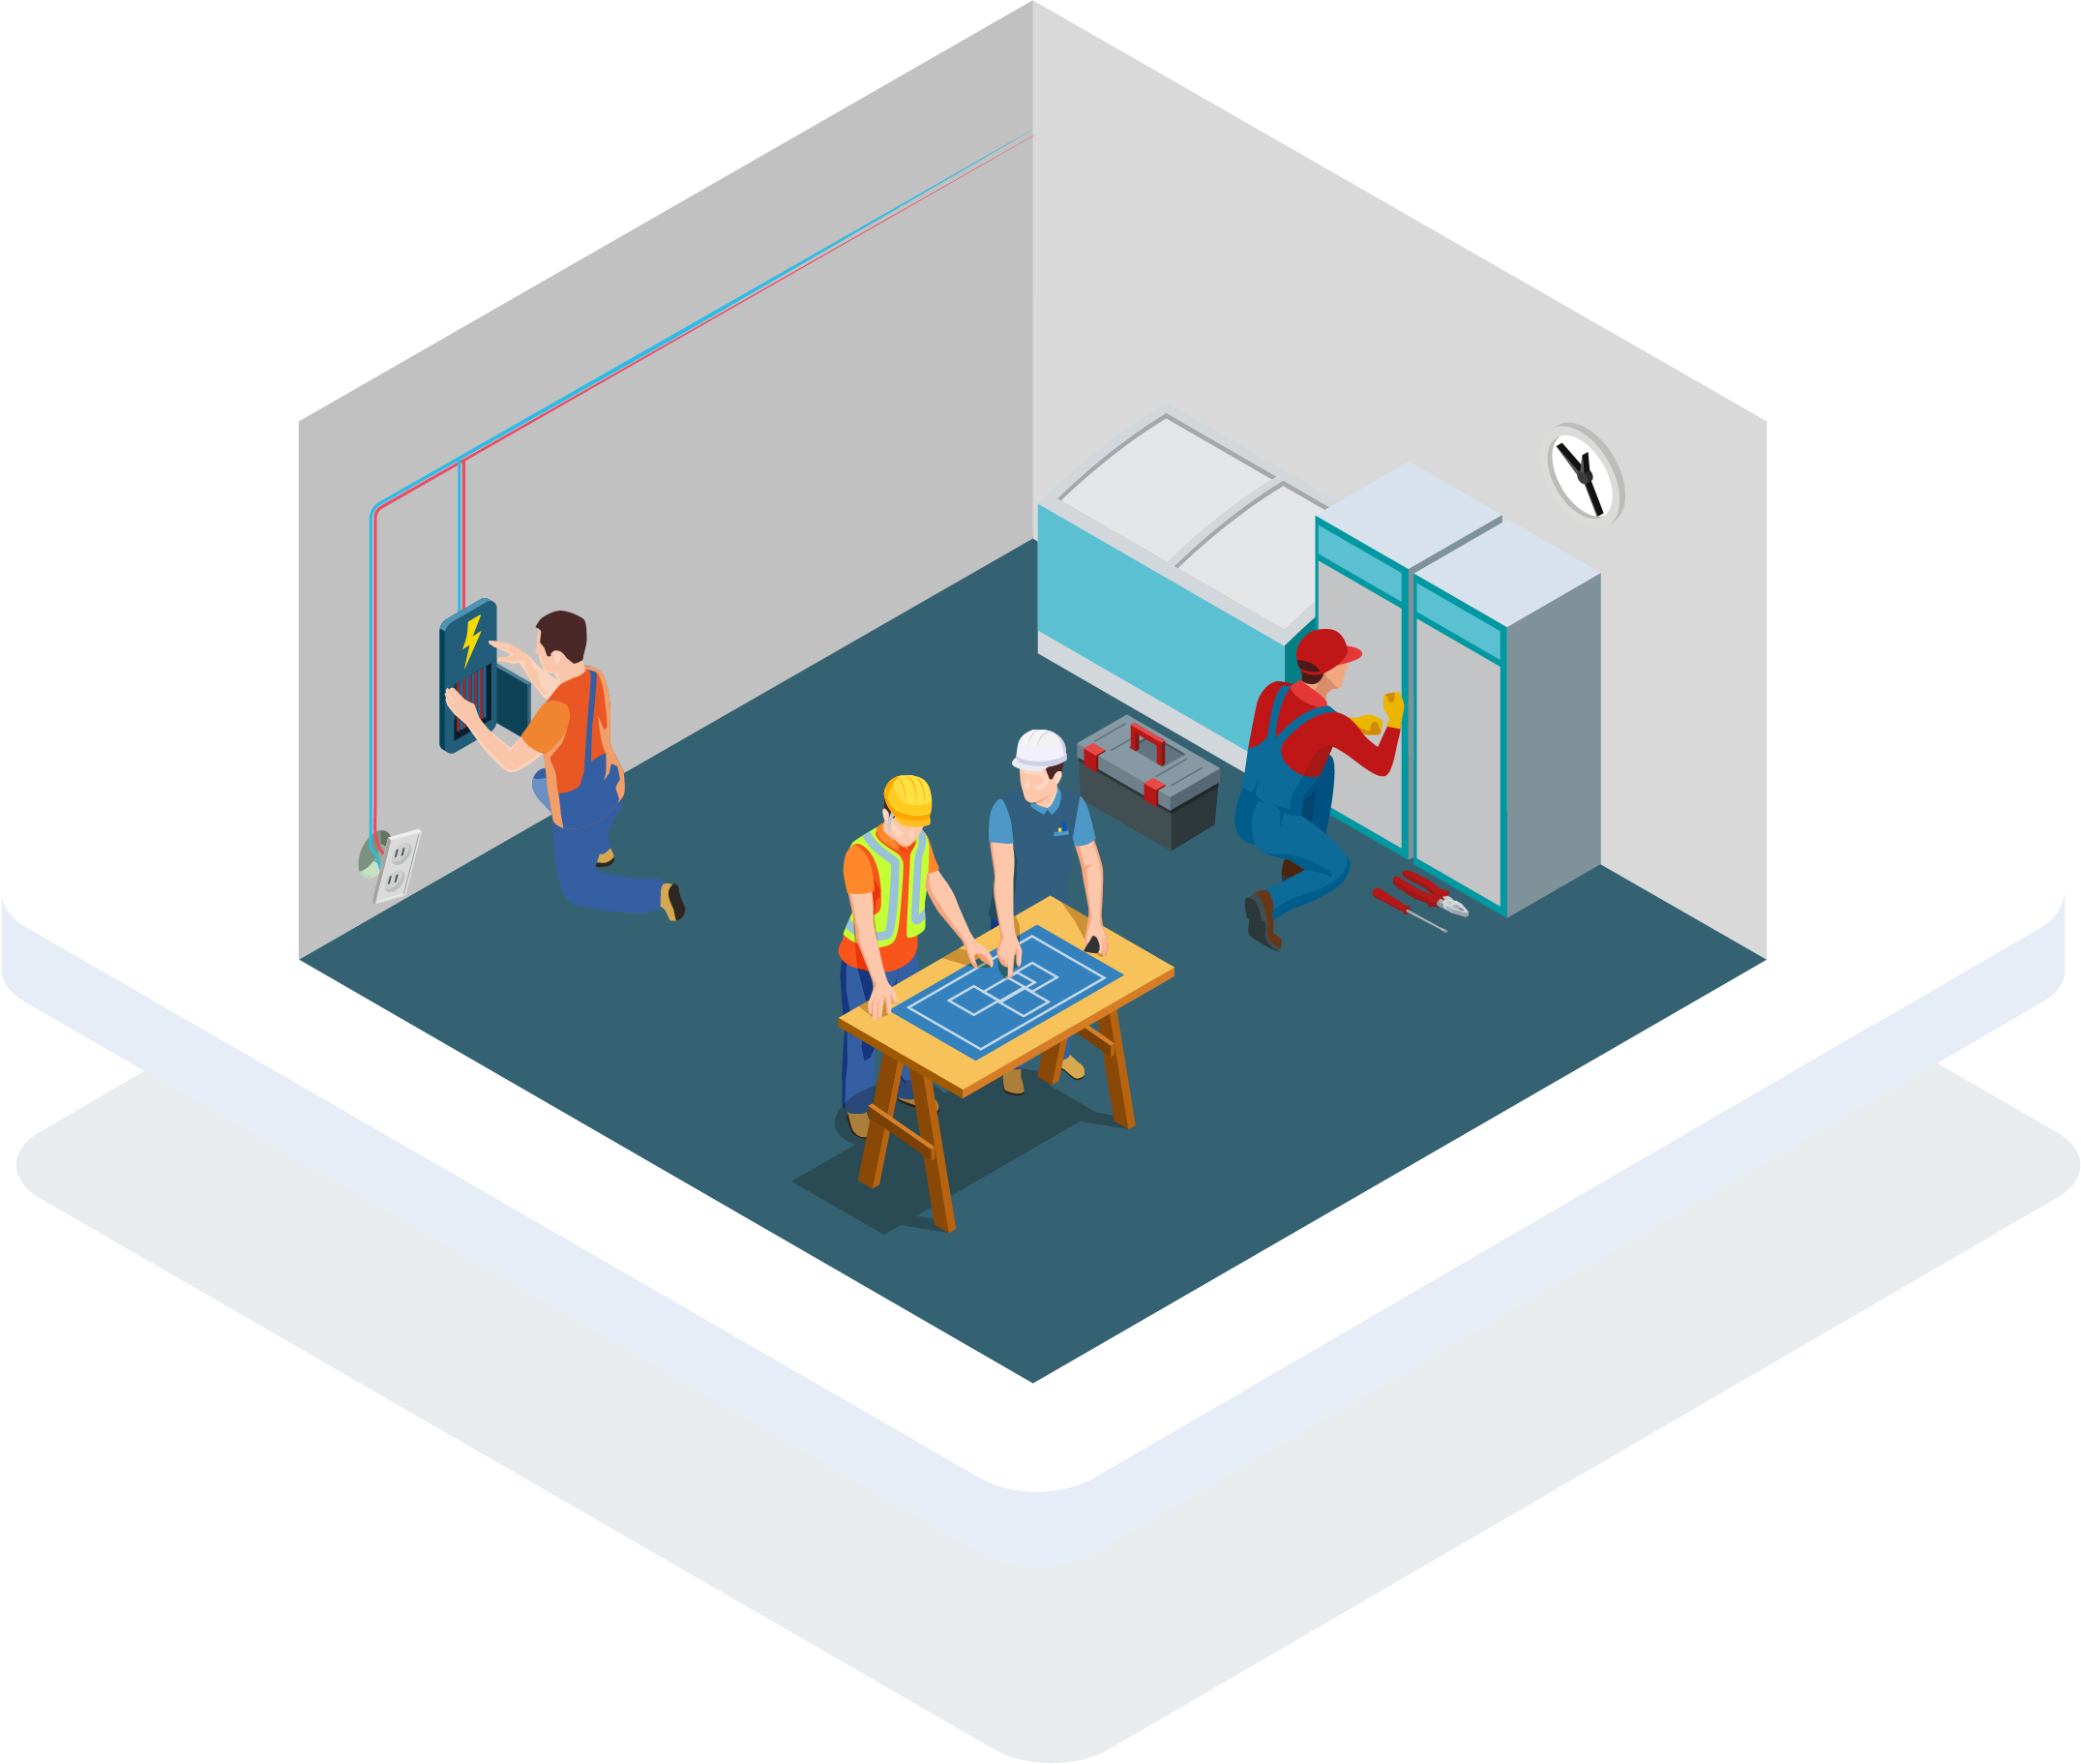 3D animated image of 4 men working in a room.